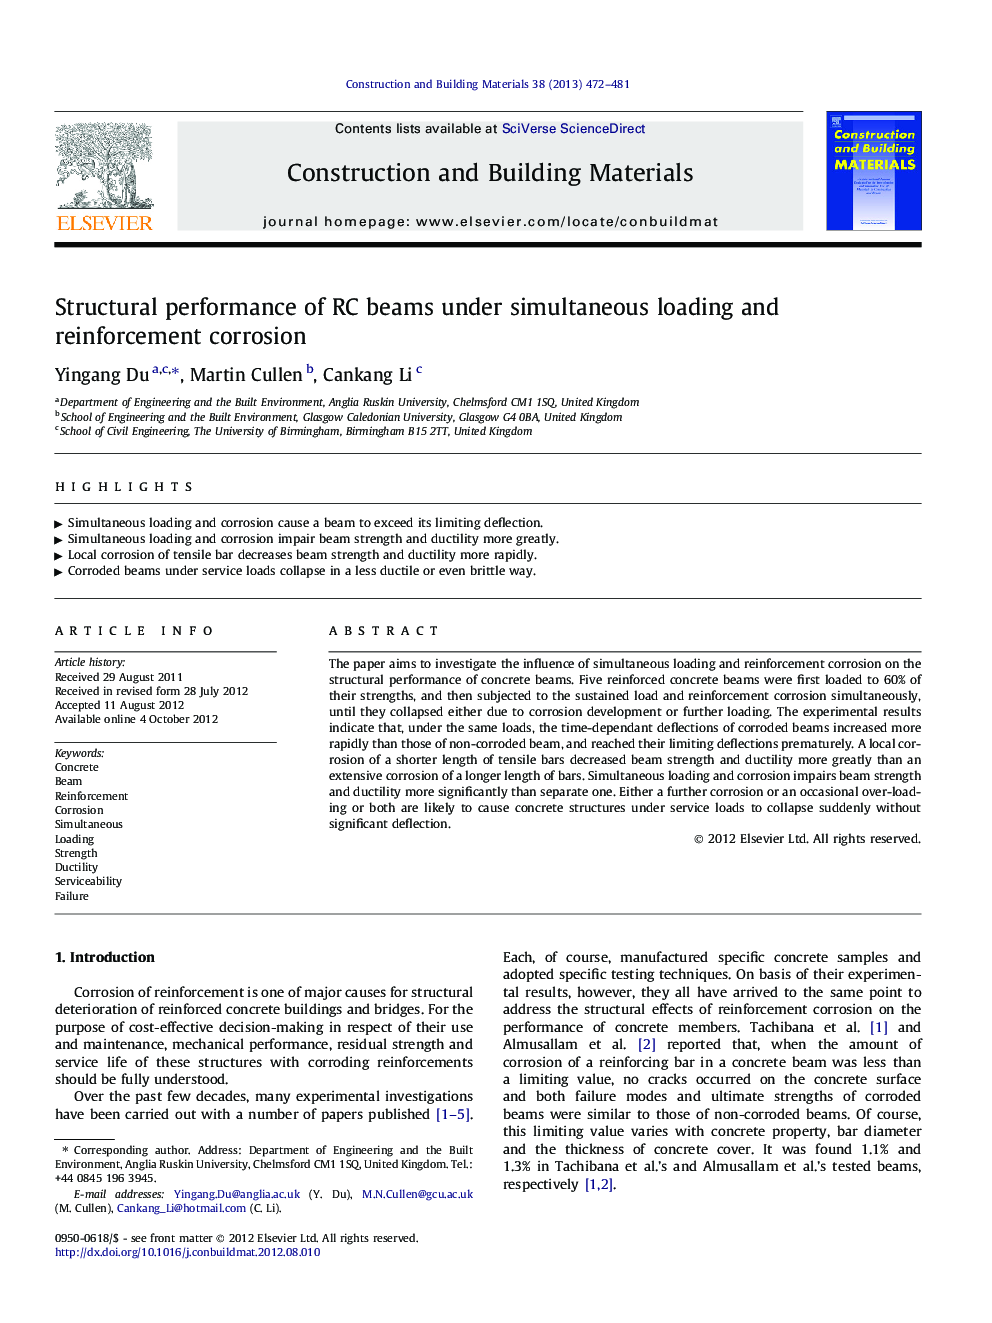 Structural performance of RC beams under simultaneous loading and reinforcement corrosion